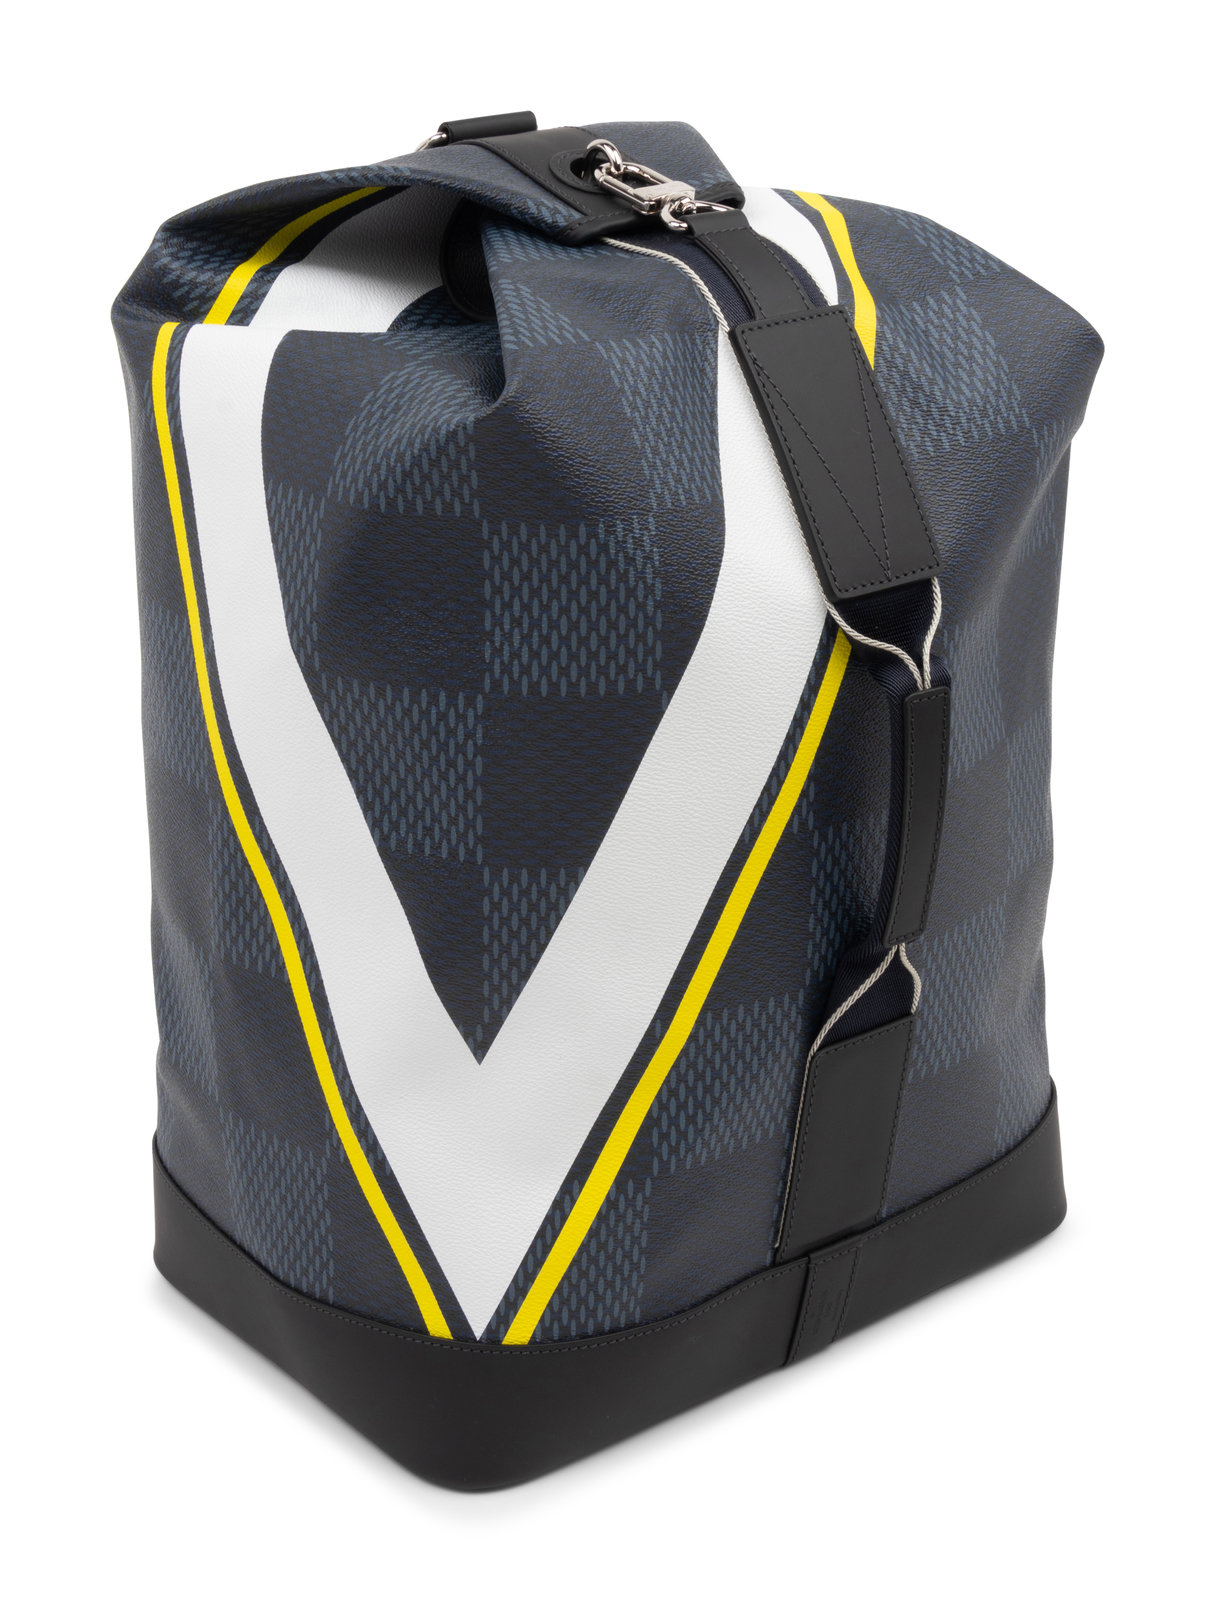 Louis Vuitton Limited Edition Sac Marin Backpack in Latitude Damier Cobalt,  America's Cup, 2017